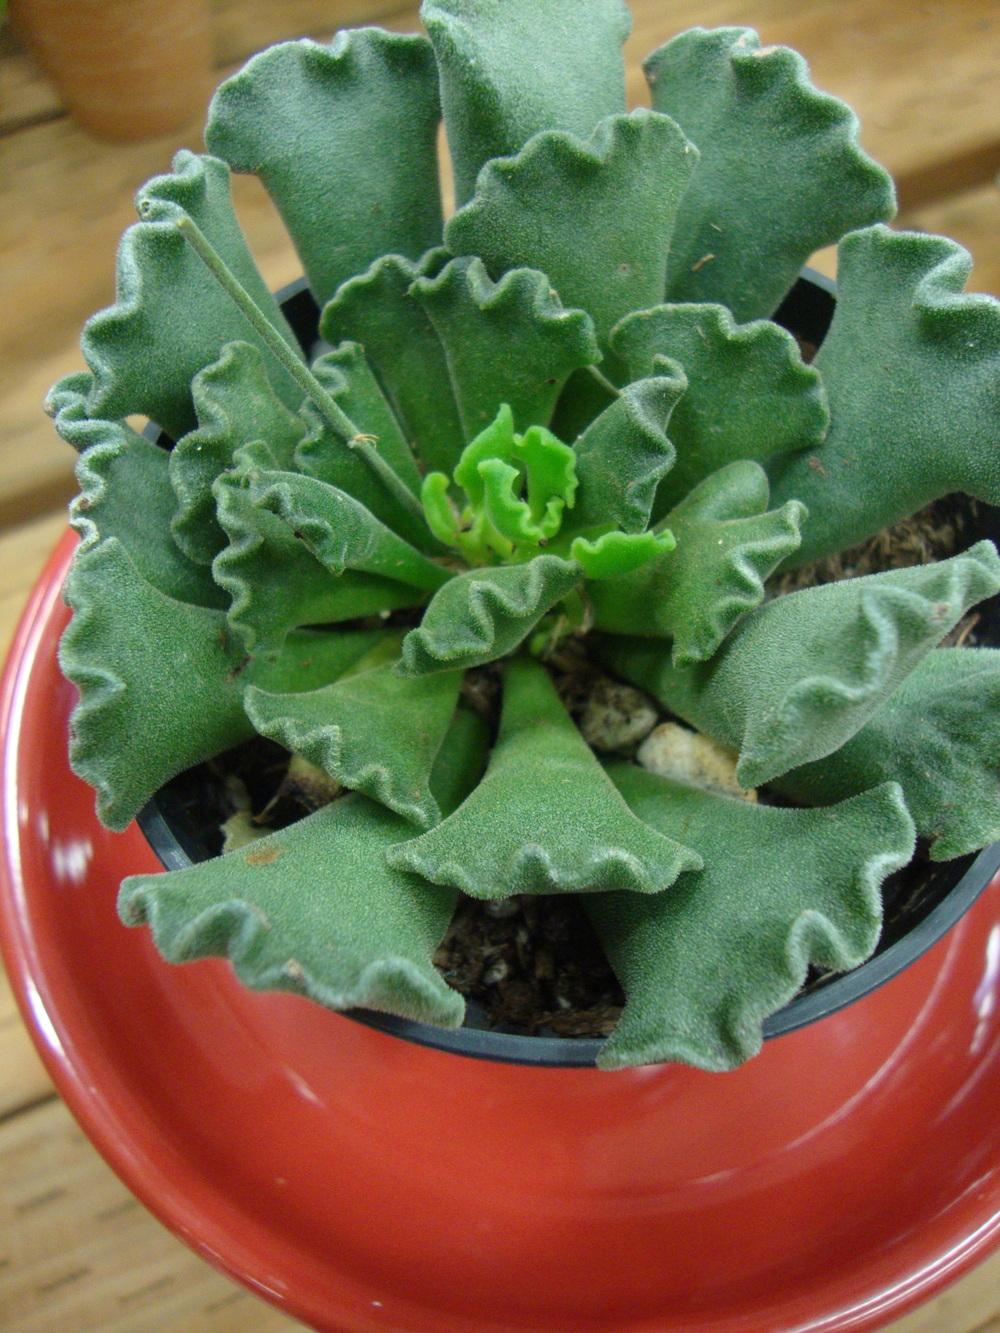 Photo of Adromischus cristatus 'Key Lime Pie' uploaded by Paul2032